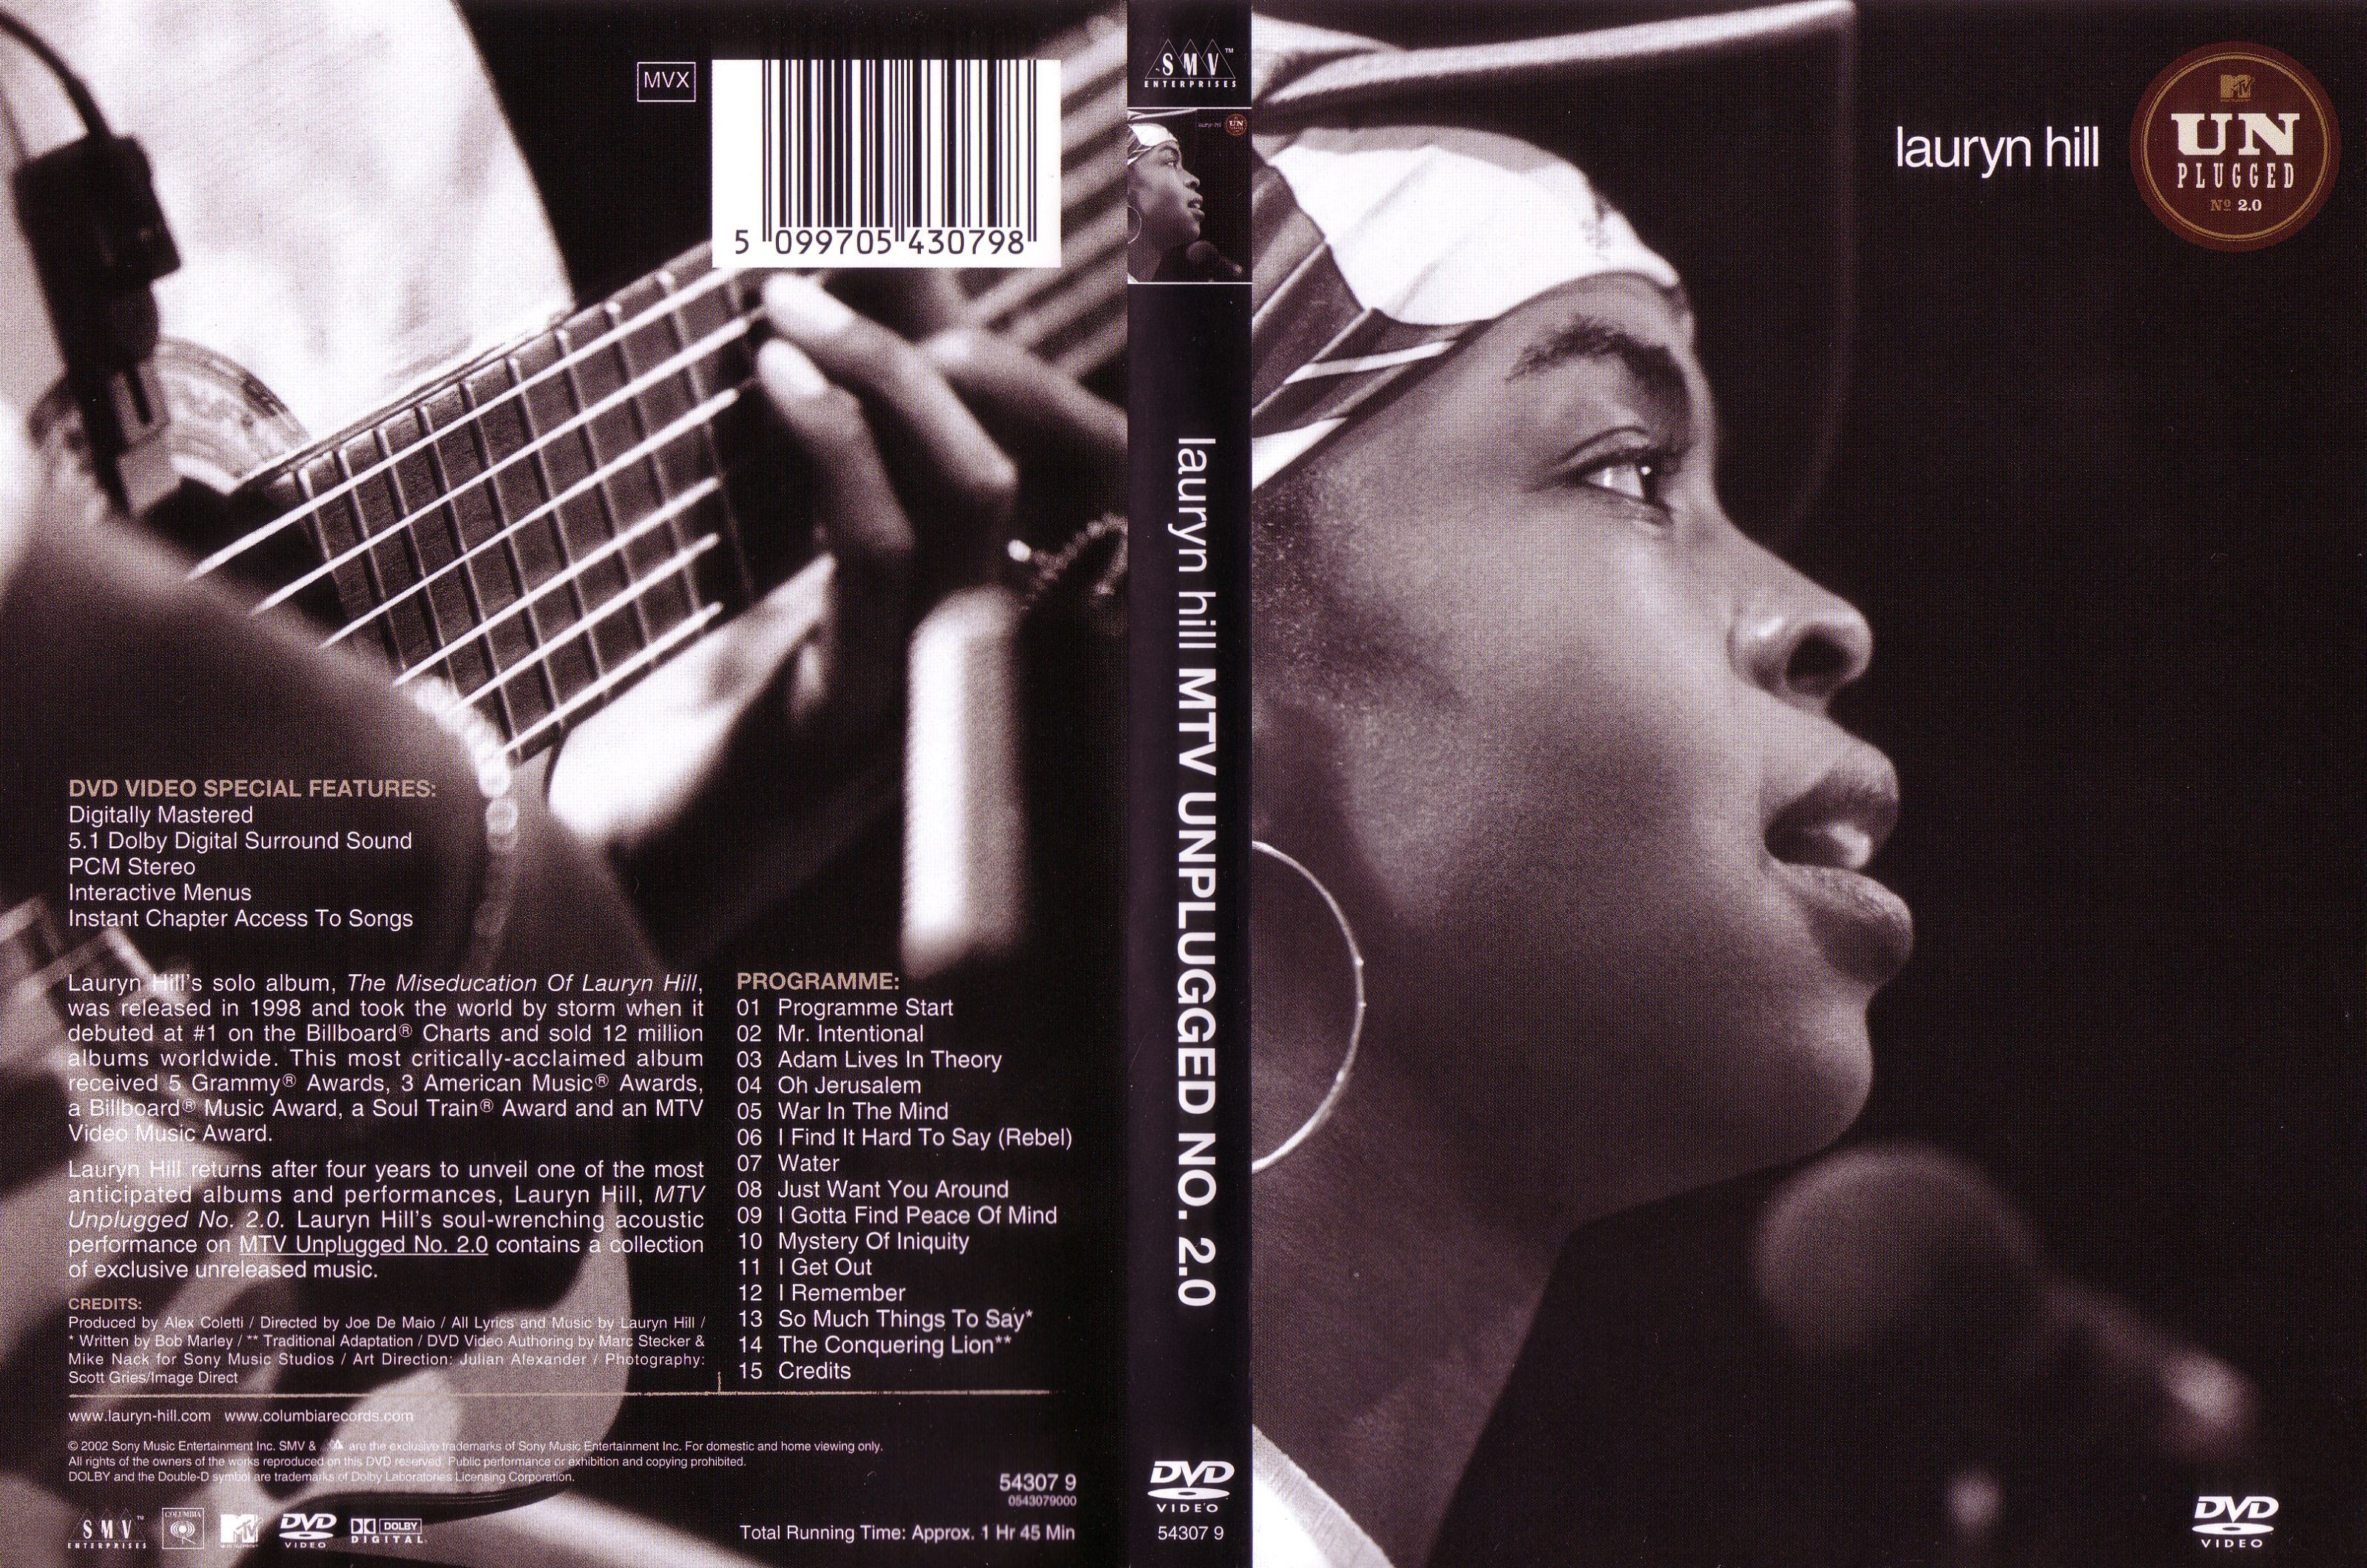 Jaquette DVD Lauryn Hill MTV Unplugged